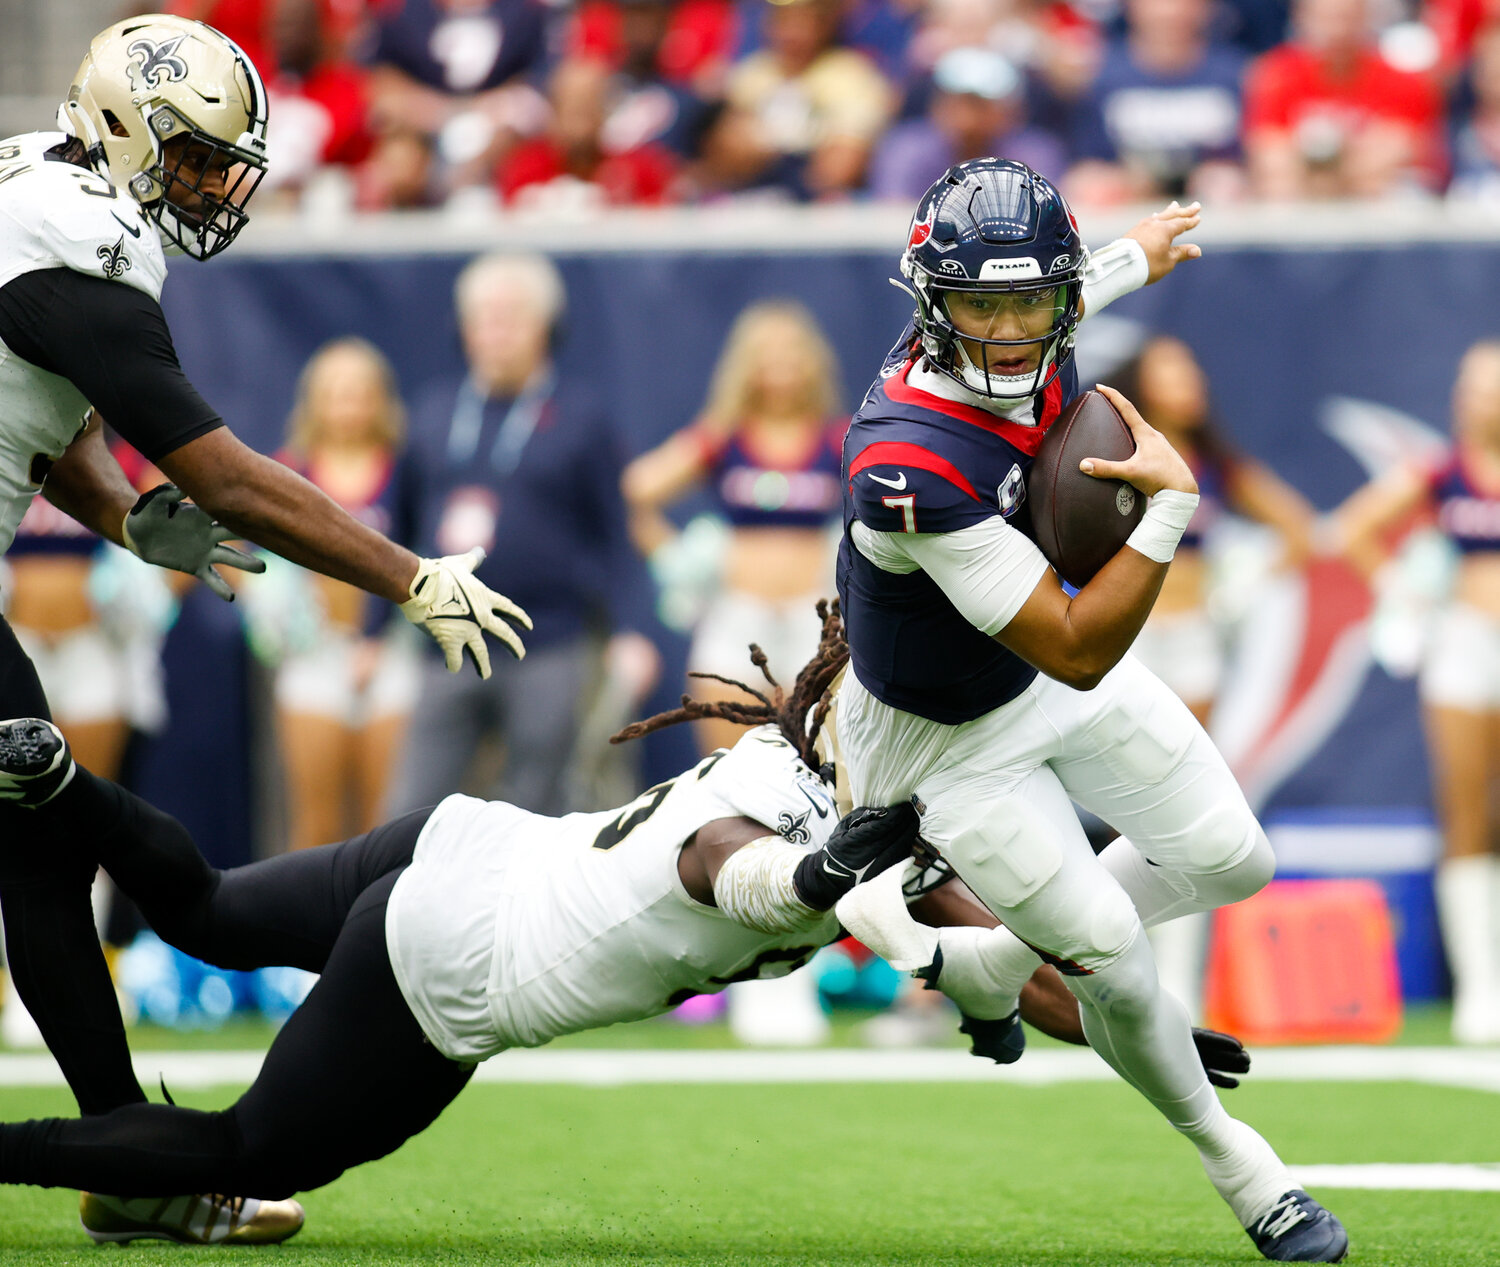 Texans quarterback C.J. Stroud (7) is sacked by Saints defensive end Carl Granderson (96) during an NFL game between the Texans and the Saints on October 15, 2023 in Houston. The Texans won, 20-13.